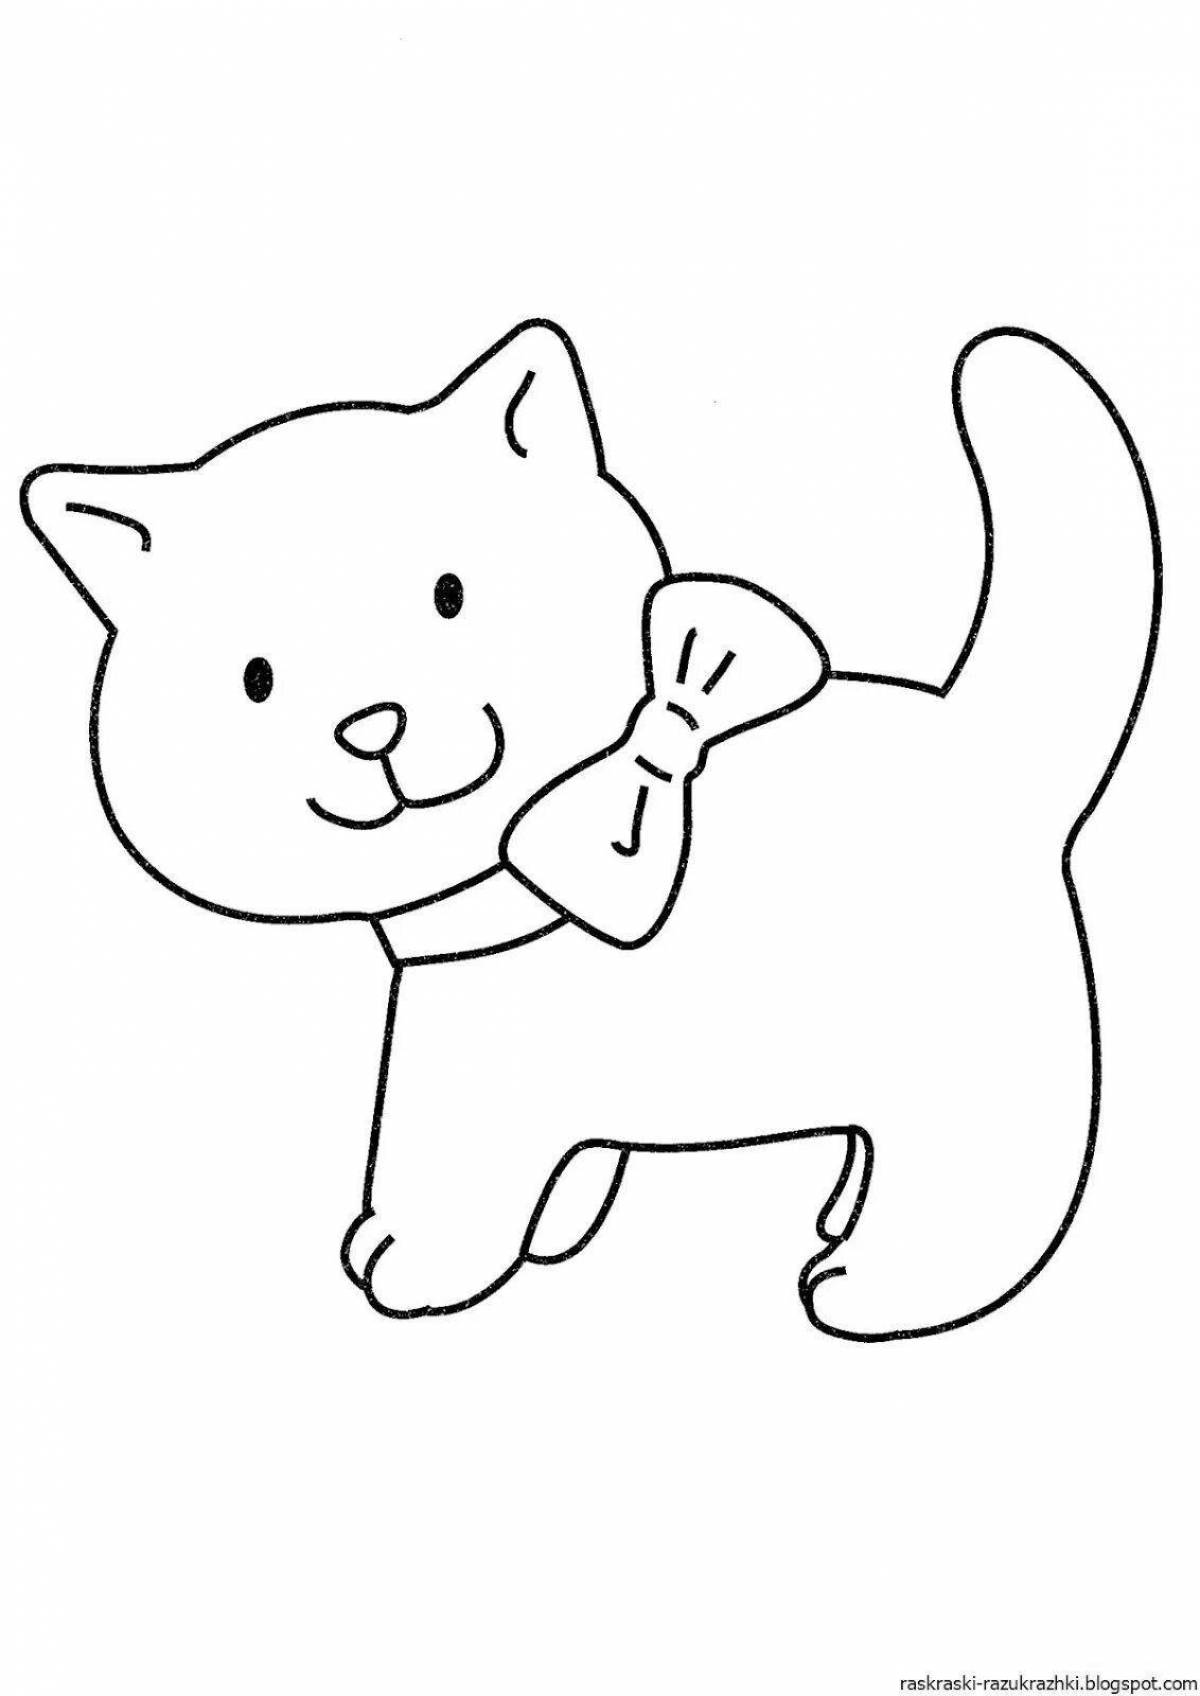 Radiant coloring page cat simple